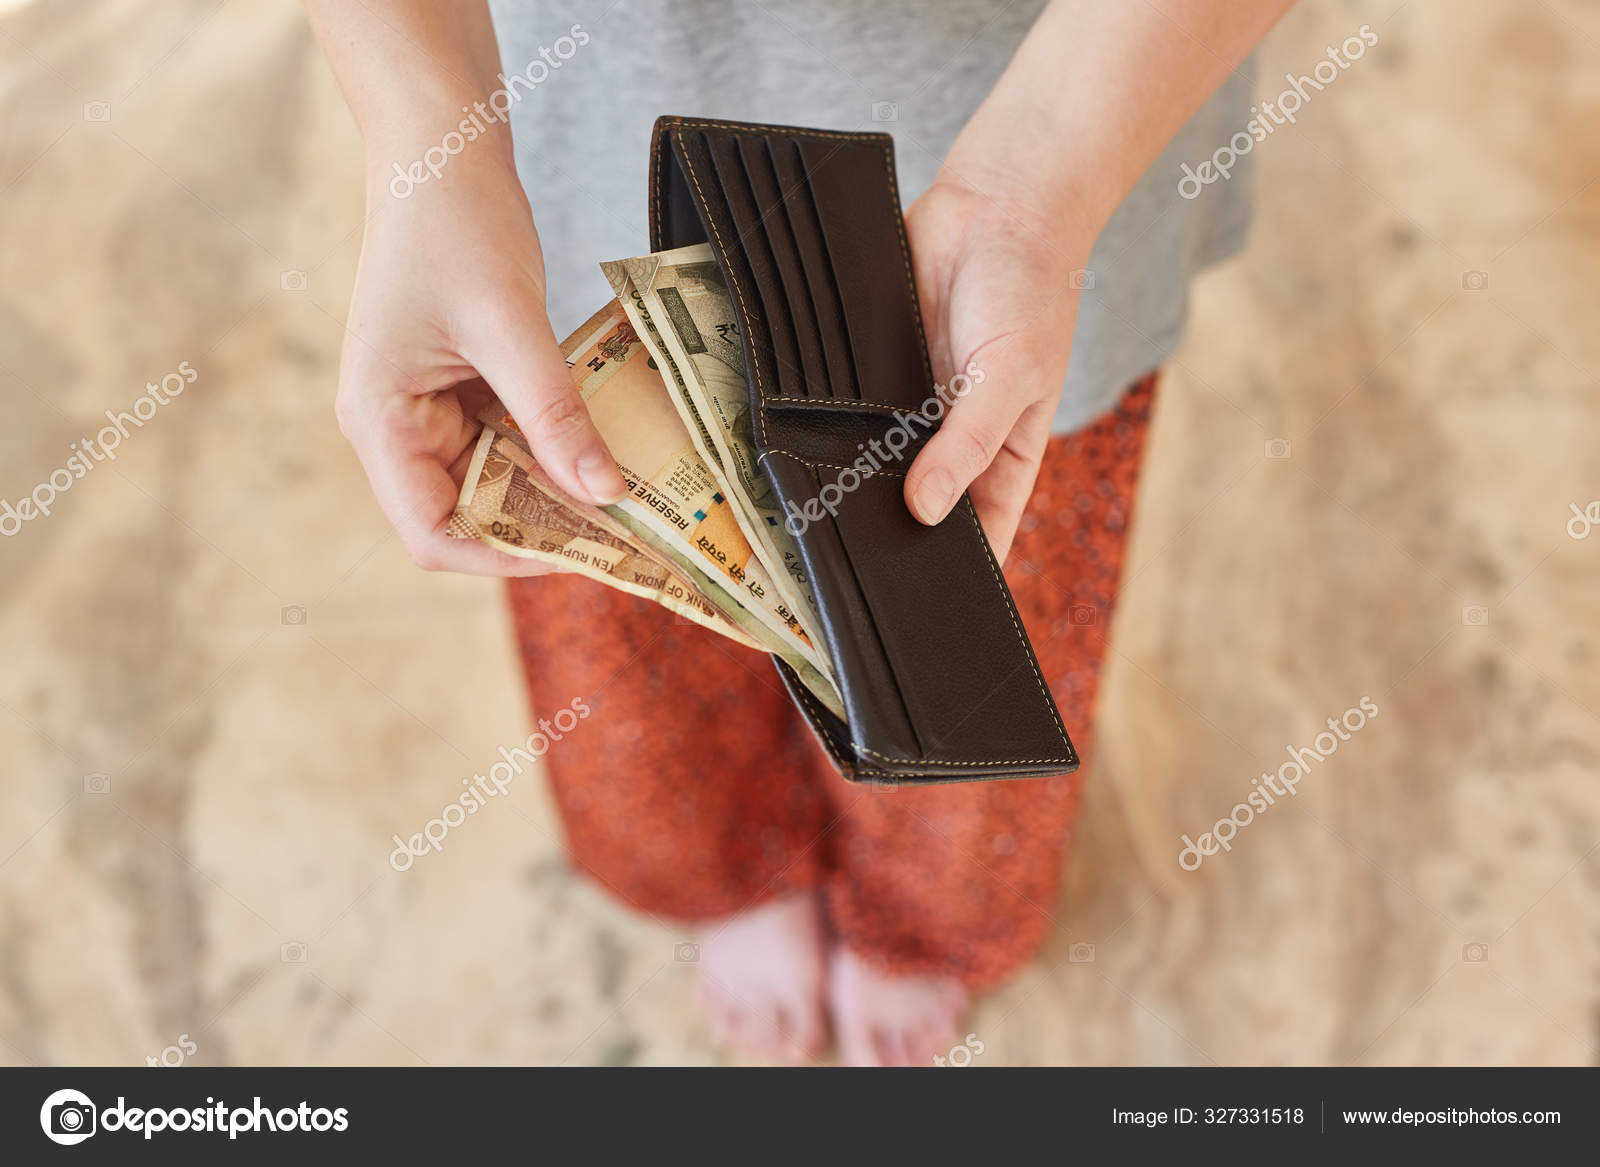 depositphotos 327331518 stock photo indian rupees in a wallet